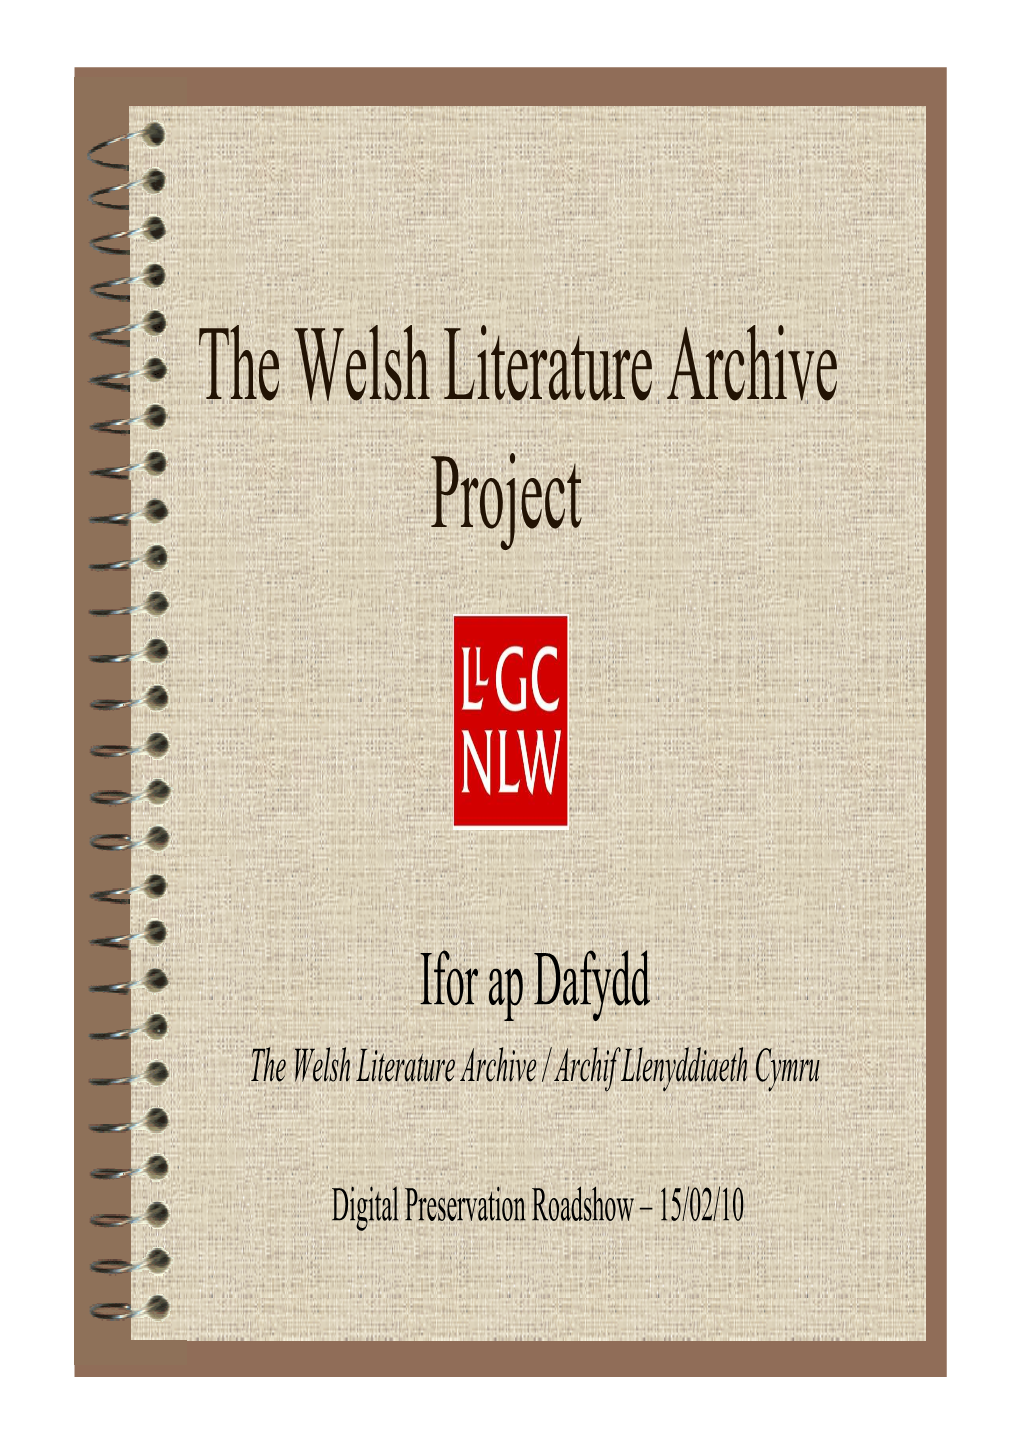 The Welsh Literature Archive Project